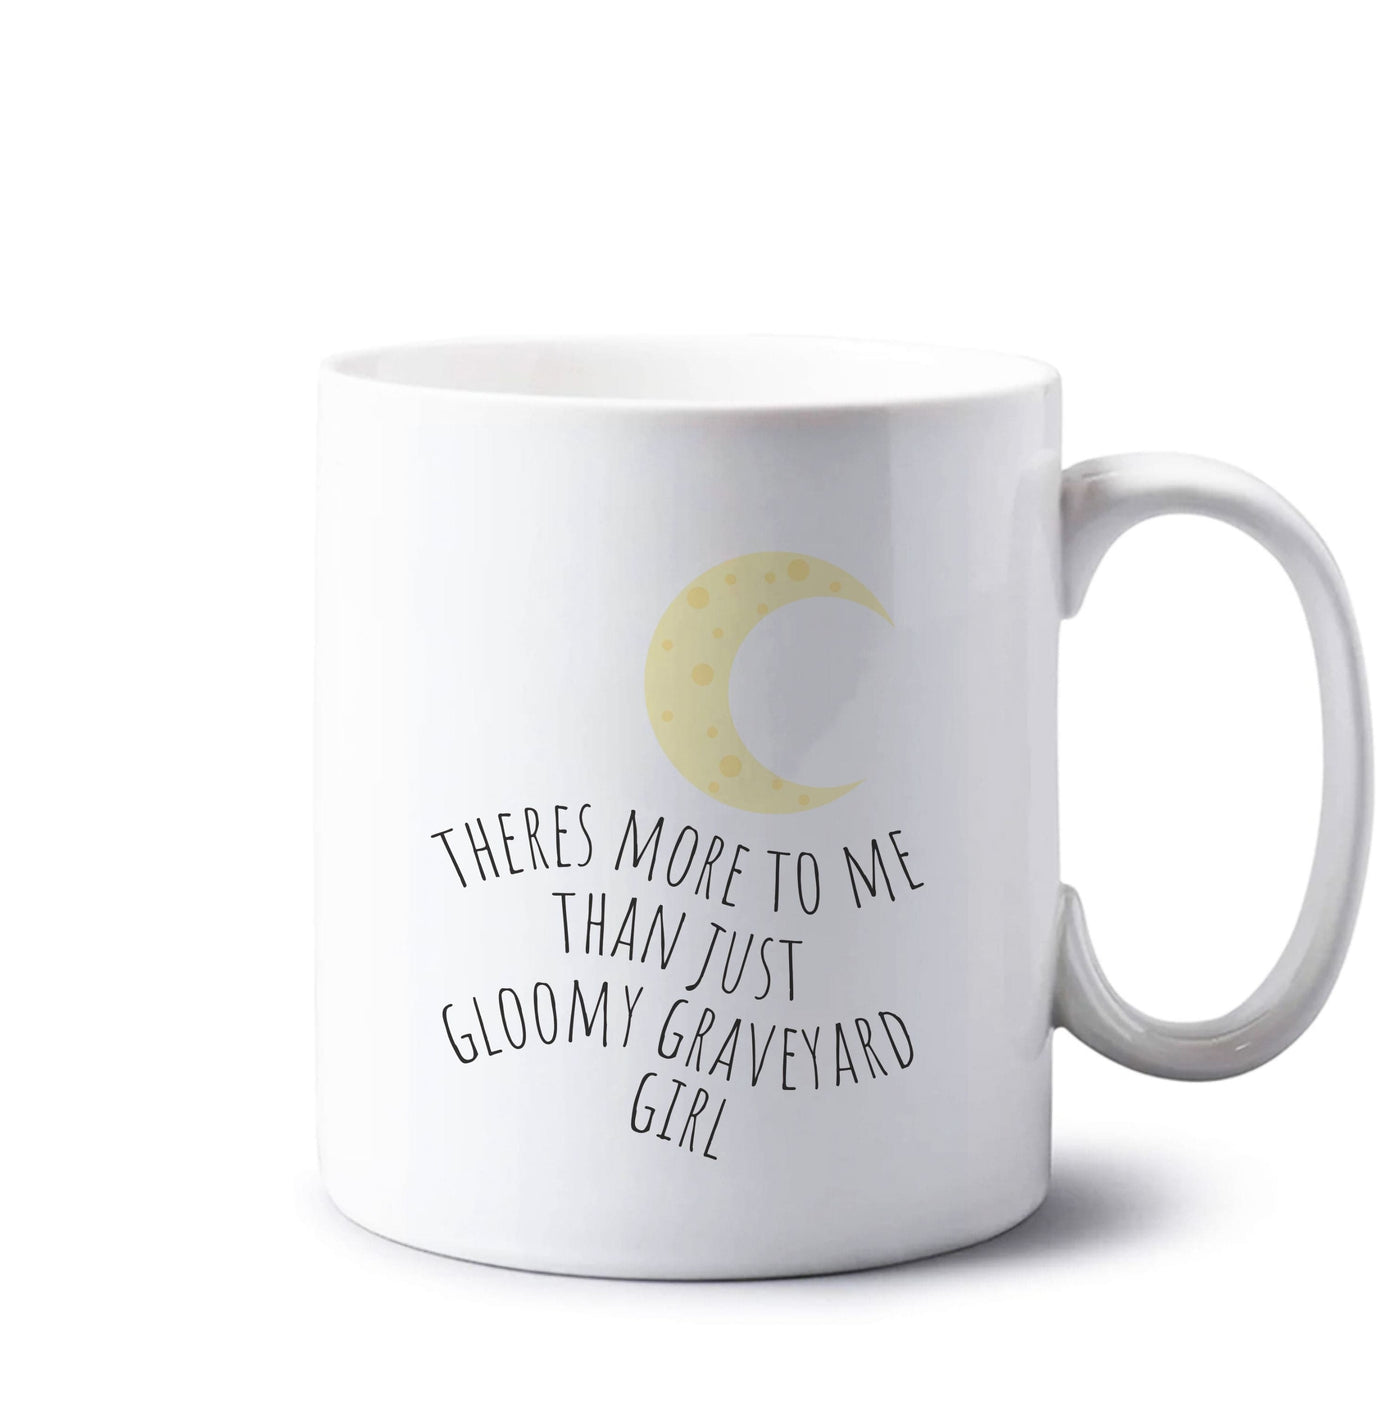 Theres More To Me - TV Quotes Mug